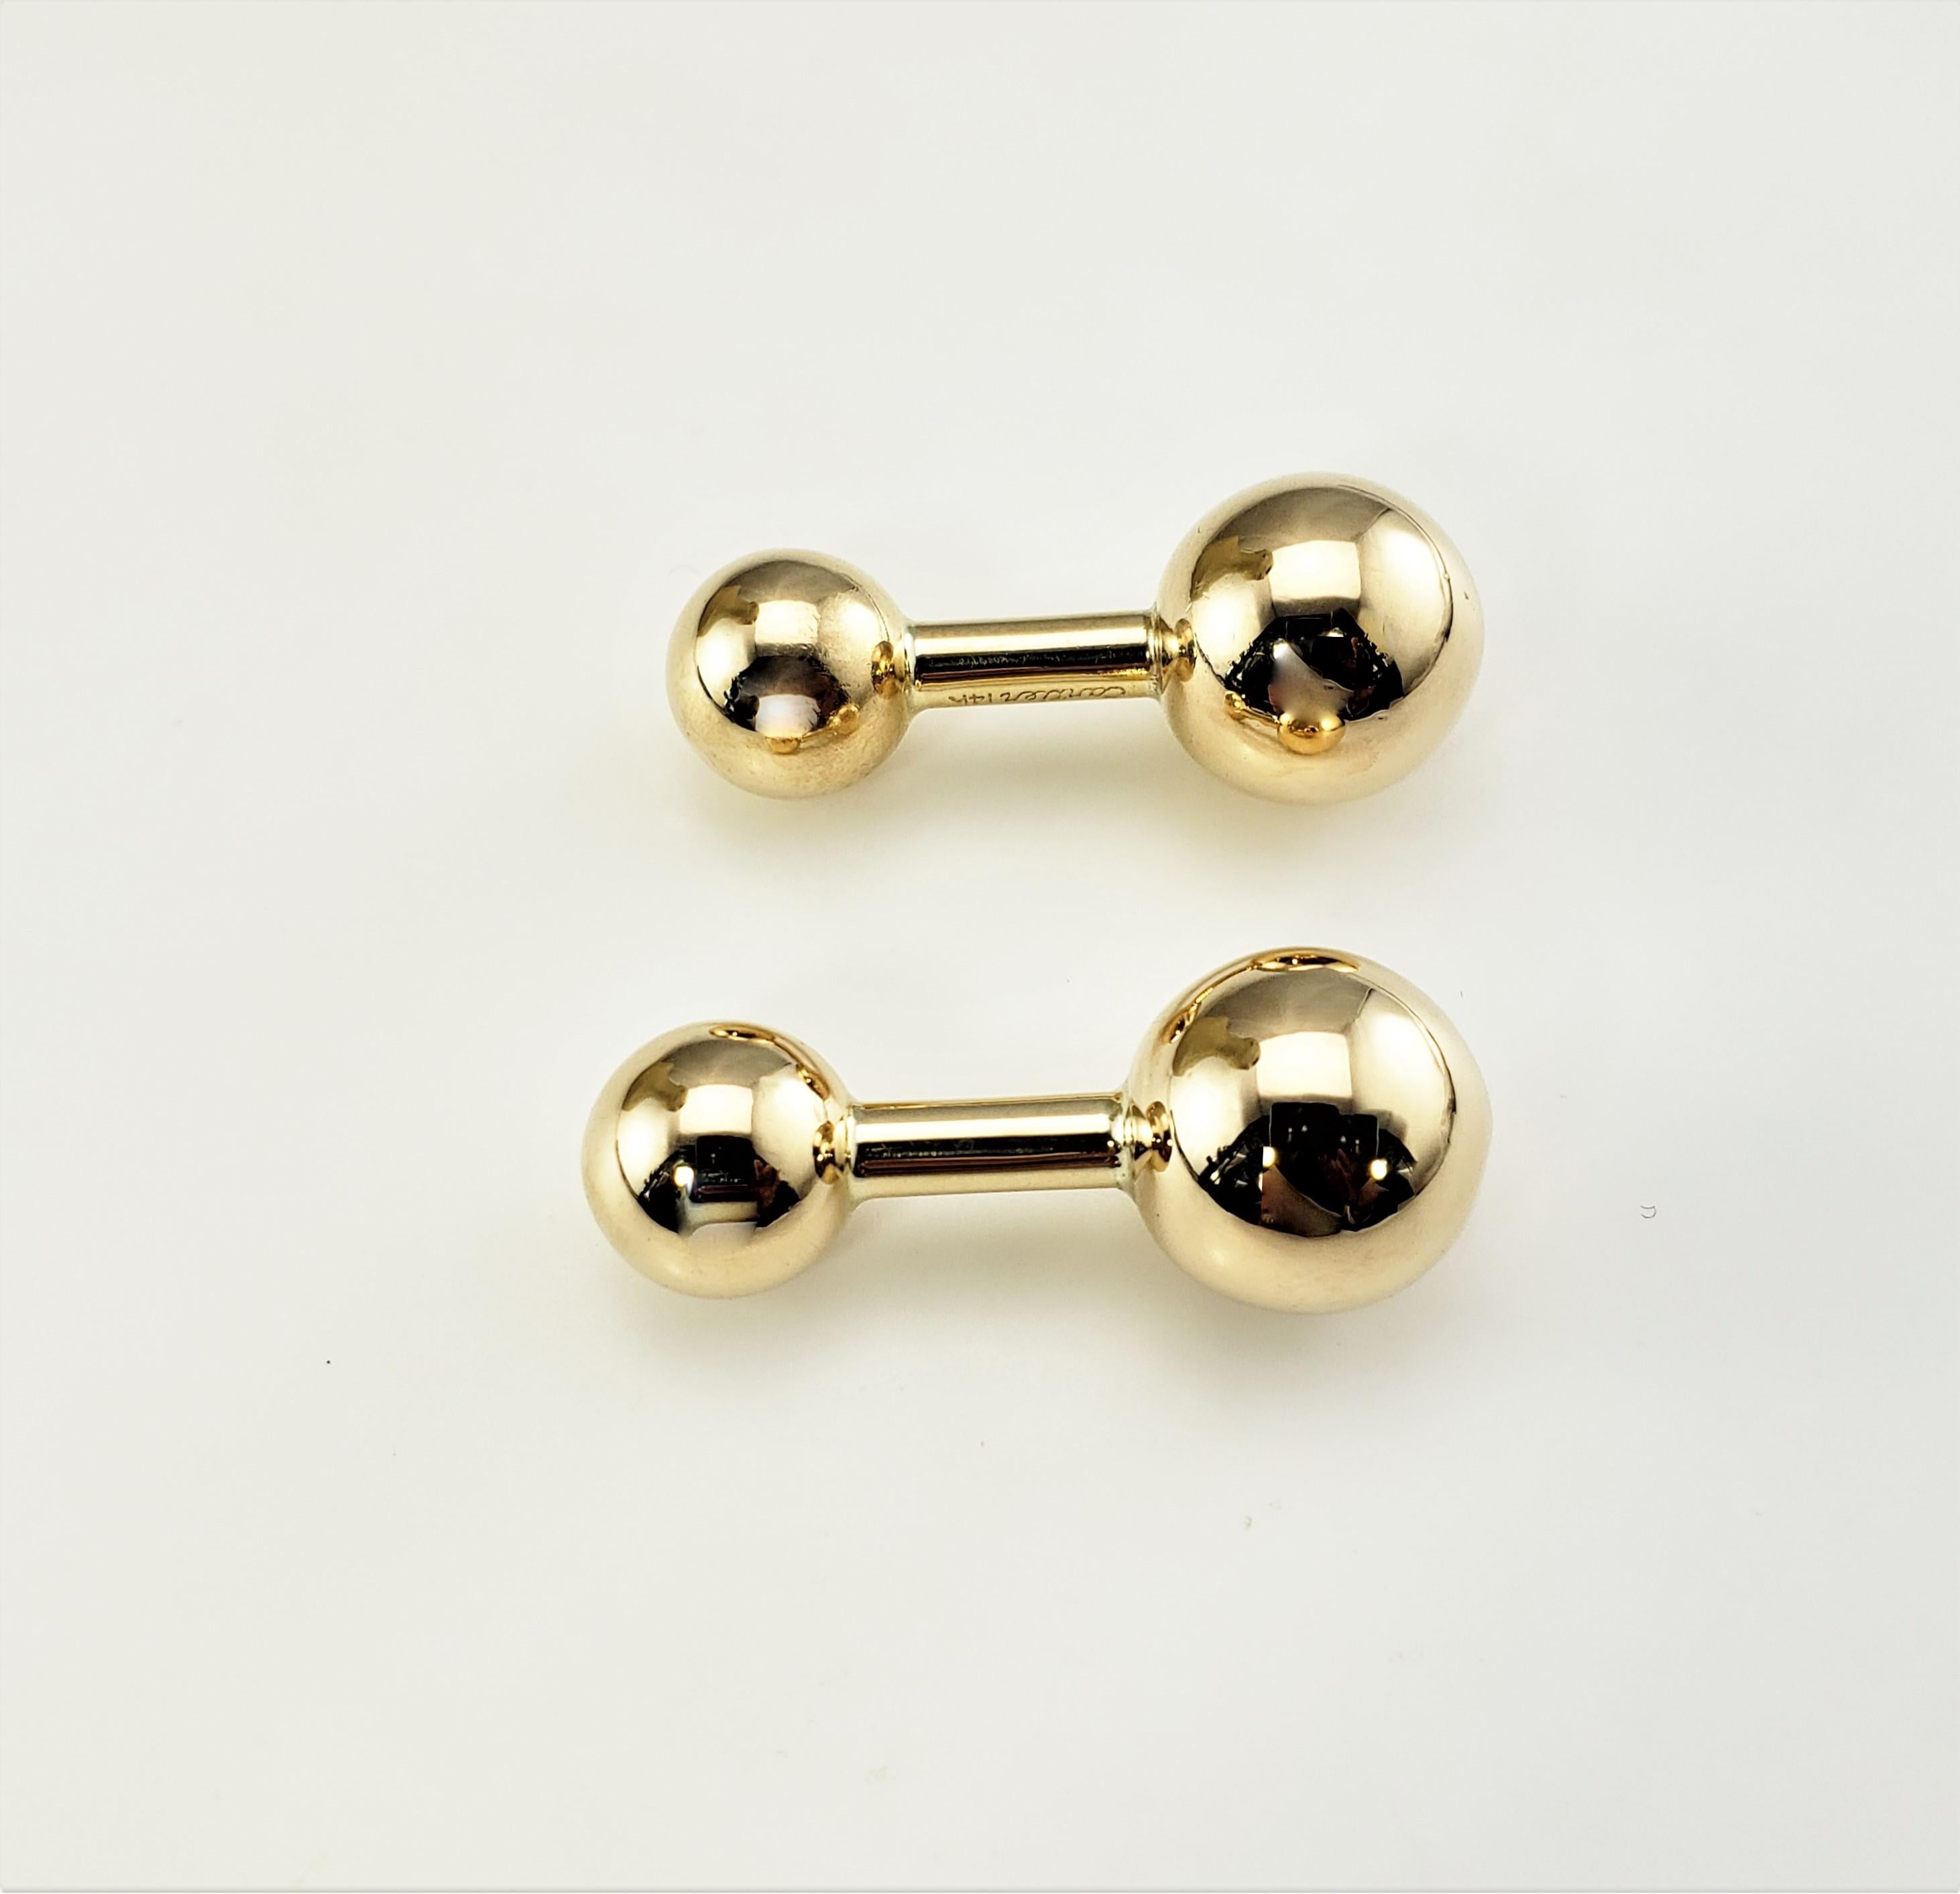 Cartier 14 Karat Yellow Gold Barbell Cufflinks-

These elegant Cartier cufflinks are crafted in meticulously detailed 14K yellow gold.

Size: 30 mm x 12 mm

Weight:  5.9 dwt. /  9.2 gr.

Hallmark:  Cartier 14K

Very good condition, professionally